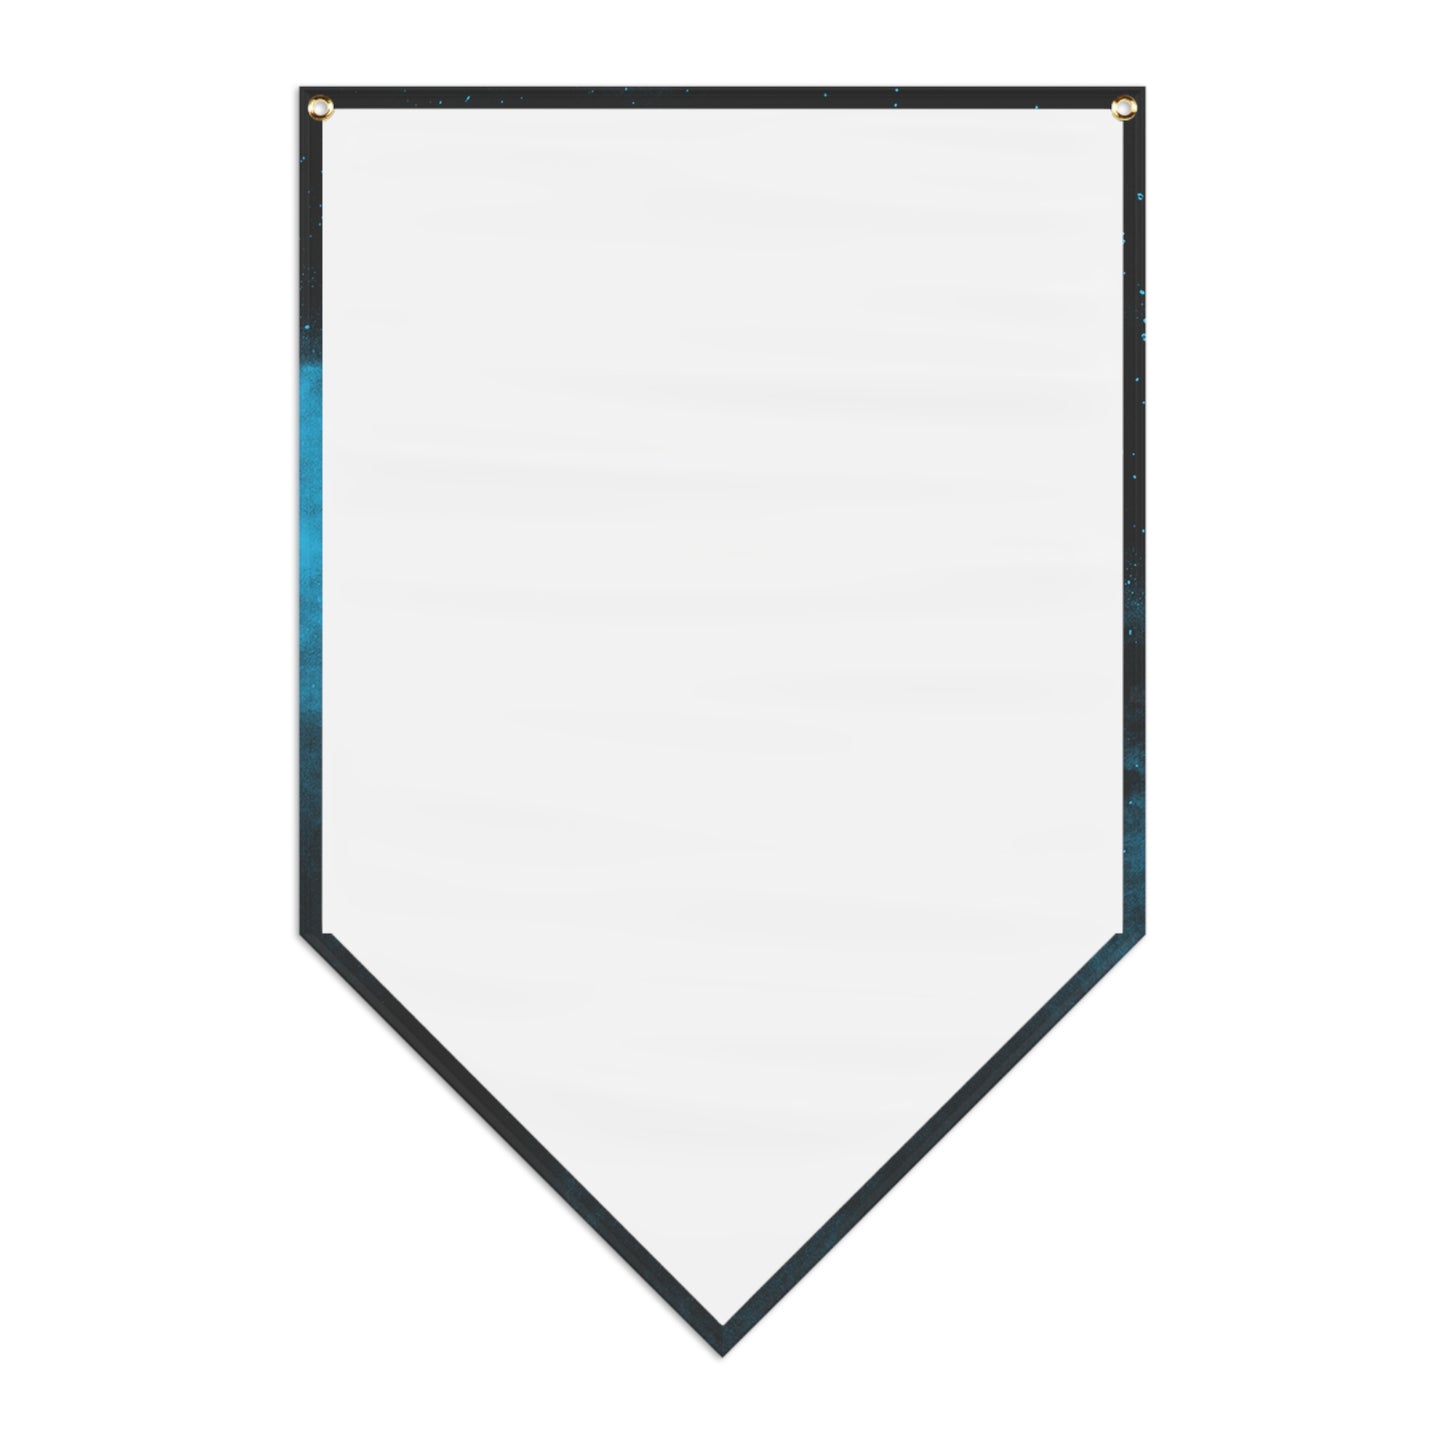 LACEY CPE TEAM case Pennant Banner